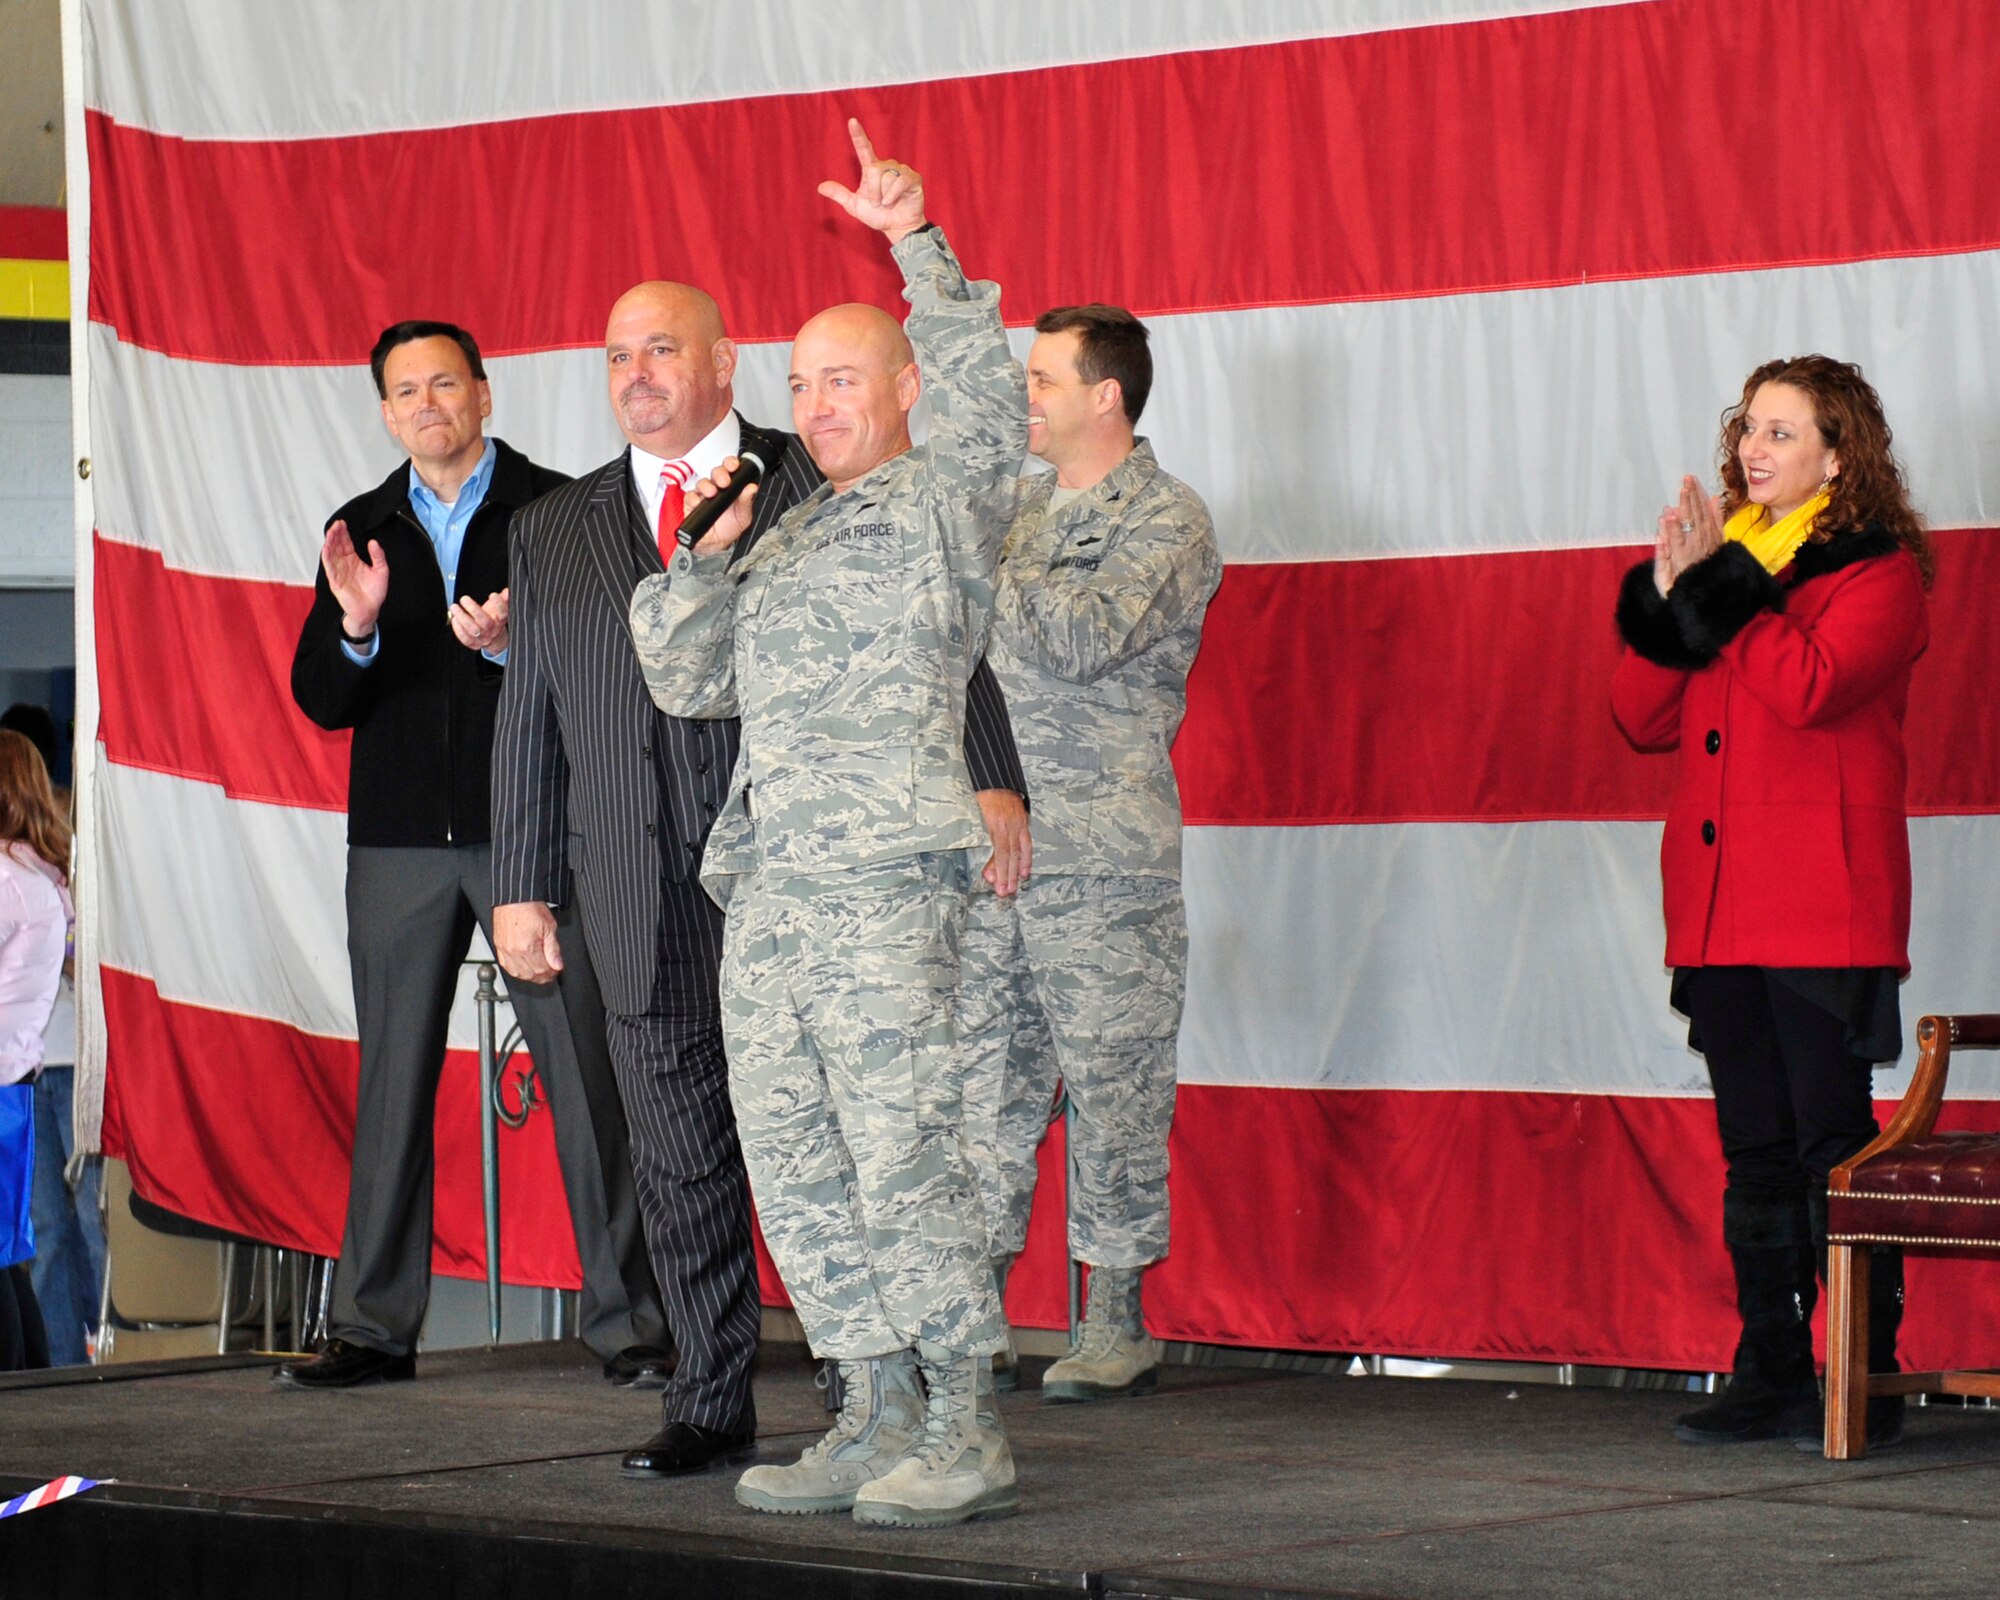 Col. Scott Long, 388th Fighter Wing commander, congratulates more than 200 Airmen upon their arrival. He's joined by his wife Staci; Col. Keith Knudson, 419th Fighter Wing commander; Mayor Steve Curtis, City of Layton; and Peter Jenks (left), Congressman Rob Bishop's District Director. (U.S. Air Force photo/Kim Cook)